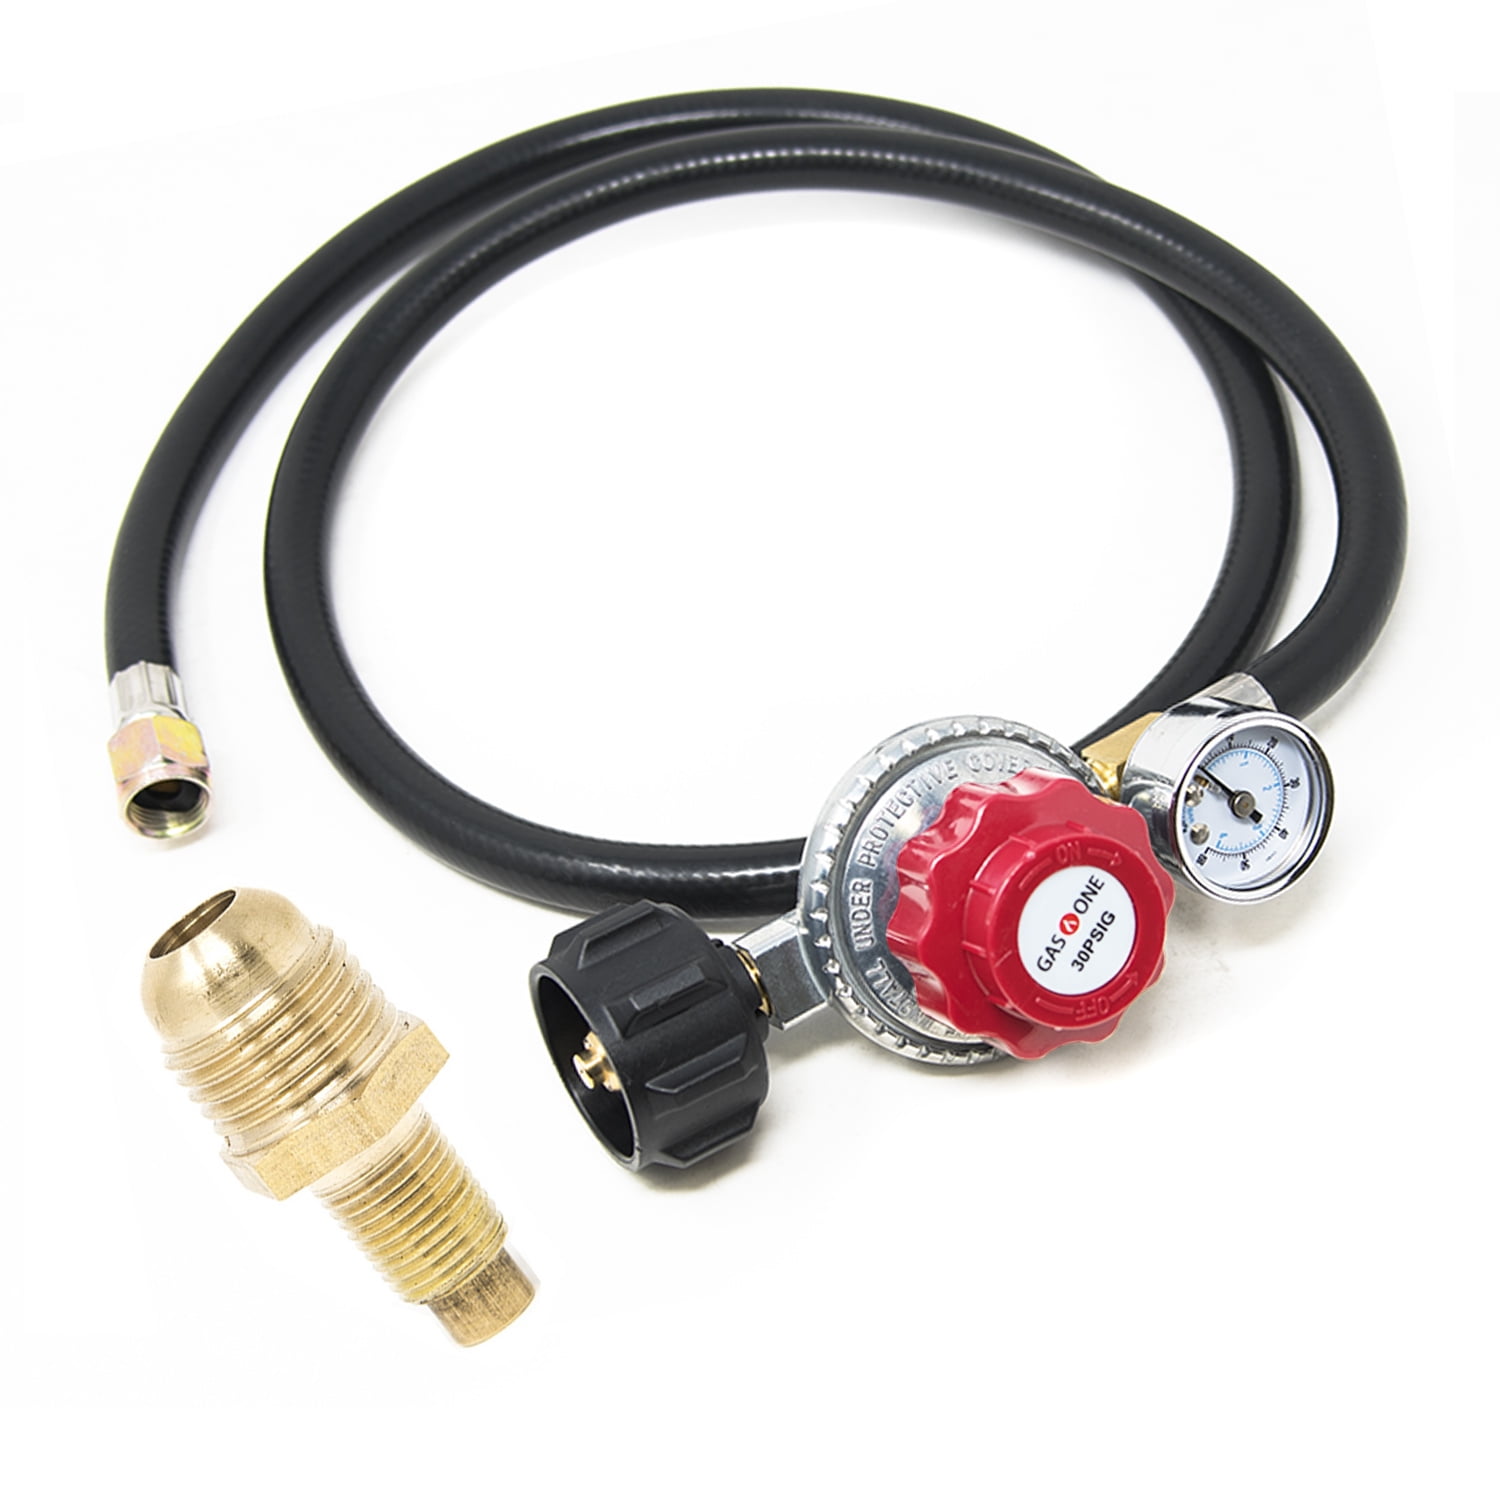 Details about   5 FT Hose Low Pressure Propane Gas Tank Regulator BBQ Qcc1/Type LP Stove 